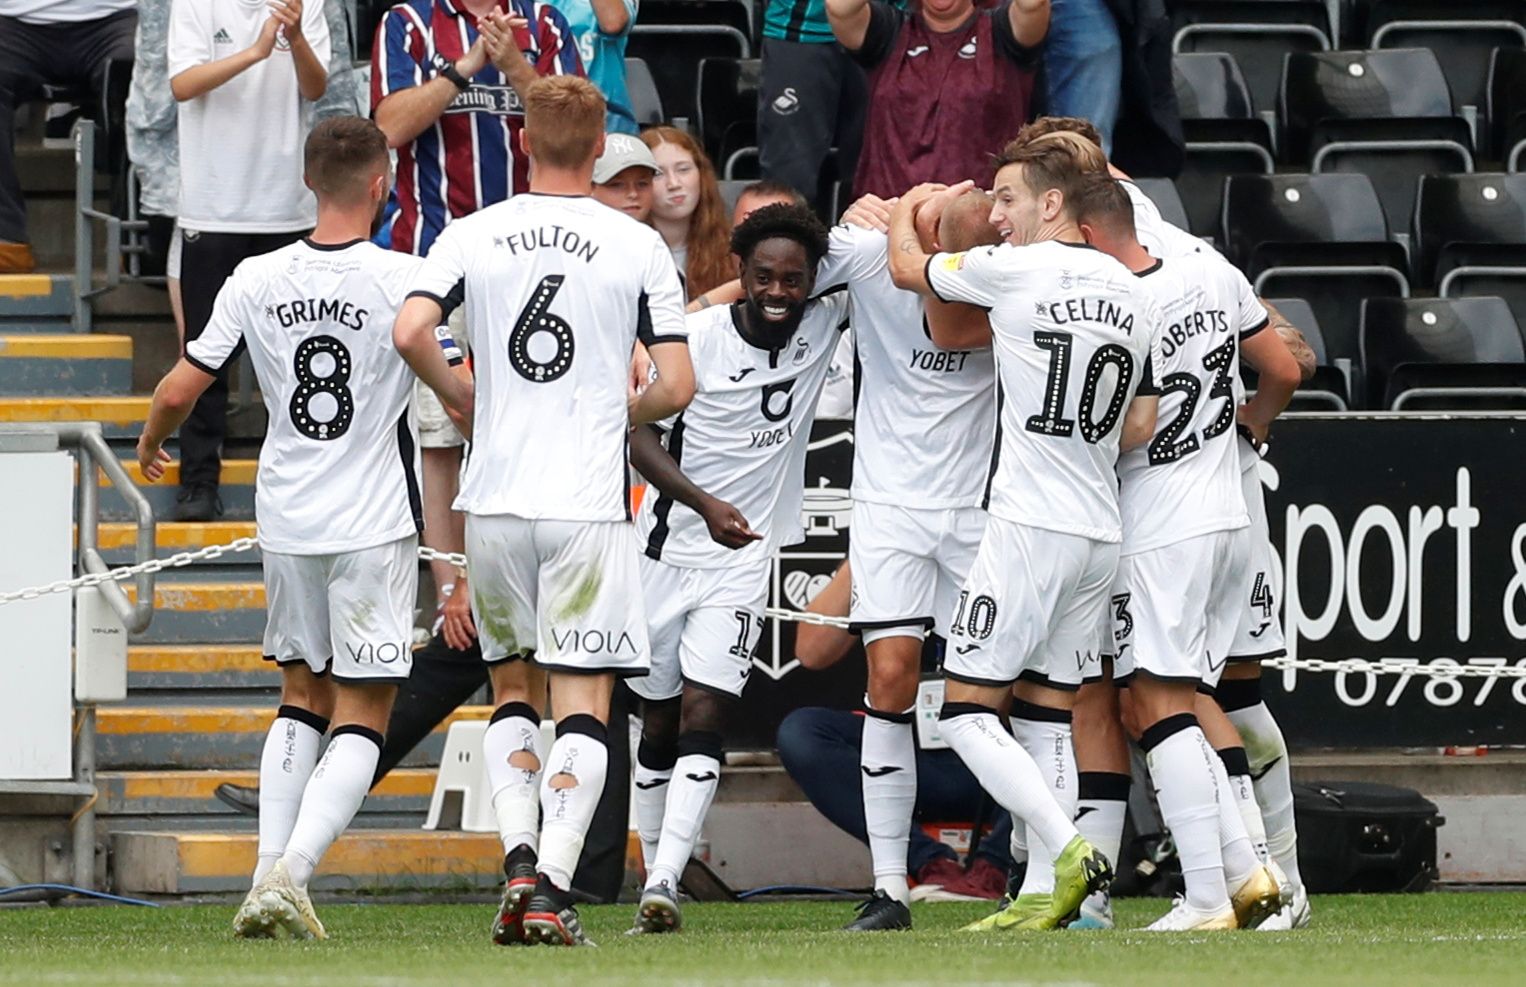 Soccer Football - Championship - Swansea City v Hull City - Liberty Stadium, Swansea, Britain - August 3, 2019   Swansea City's Mike Van Der Hoorn celebrates scoring their second goal with teammates   Action Images/Matthew Childs    EDITORIAL USE ONLY. No use with unauthorized audio, video, data, fixture lists, club/league logos or "live" services. Online in-match use limited to 75 images, no video emulation. No use in betting, games or single club/league/player publications.  Please contact you